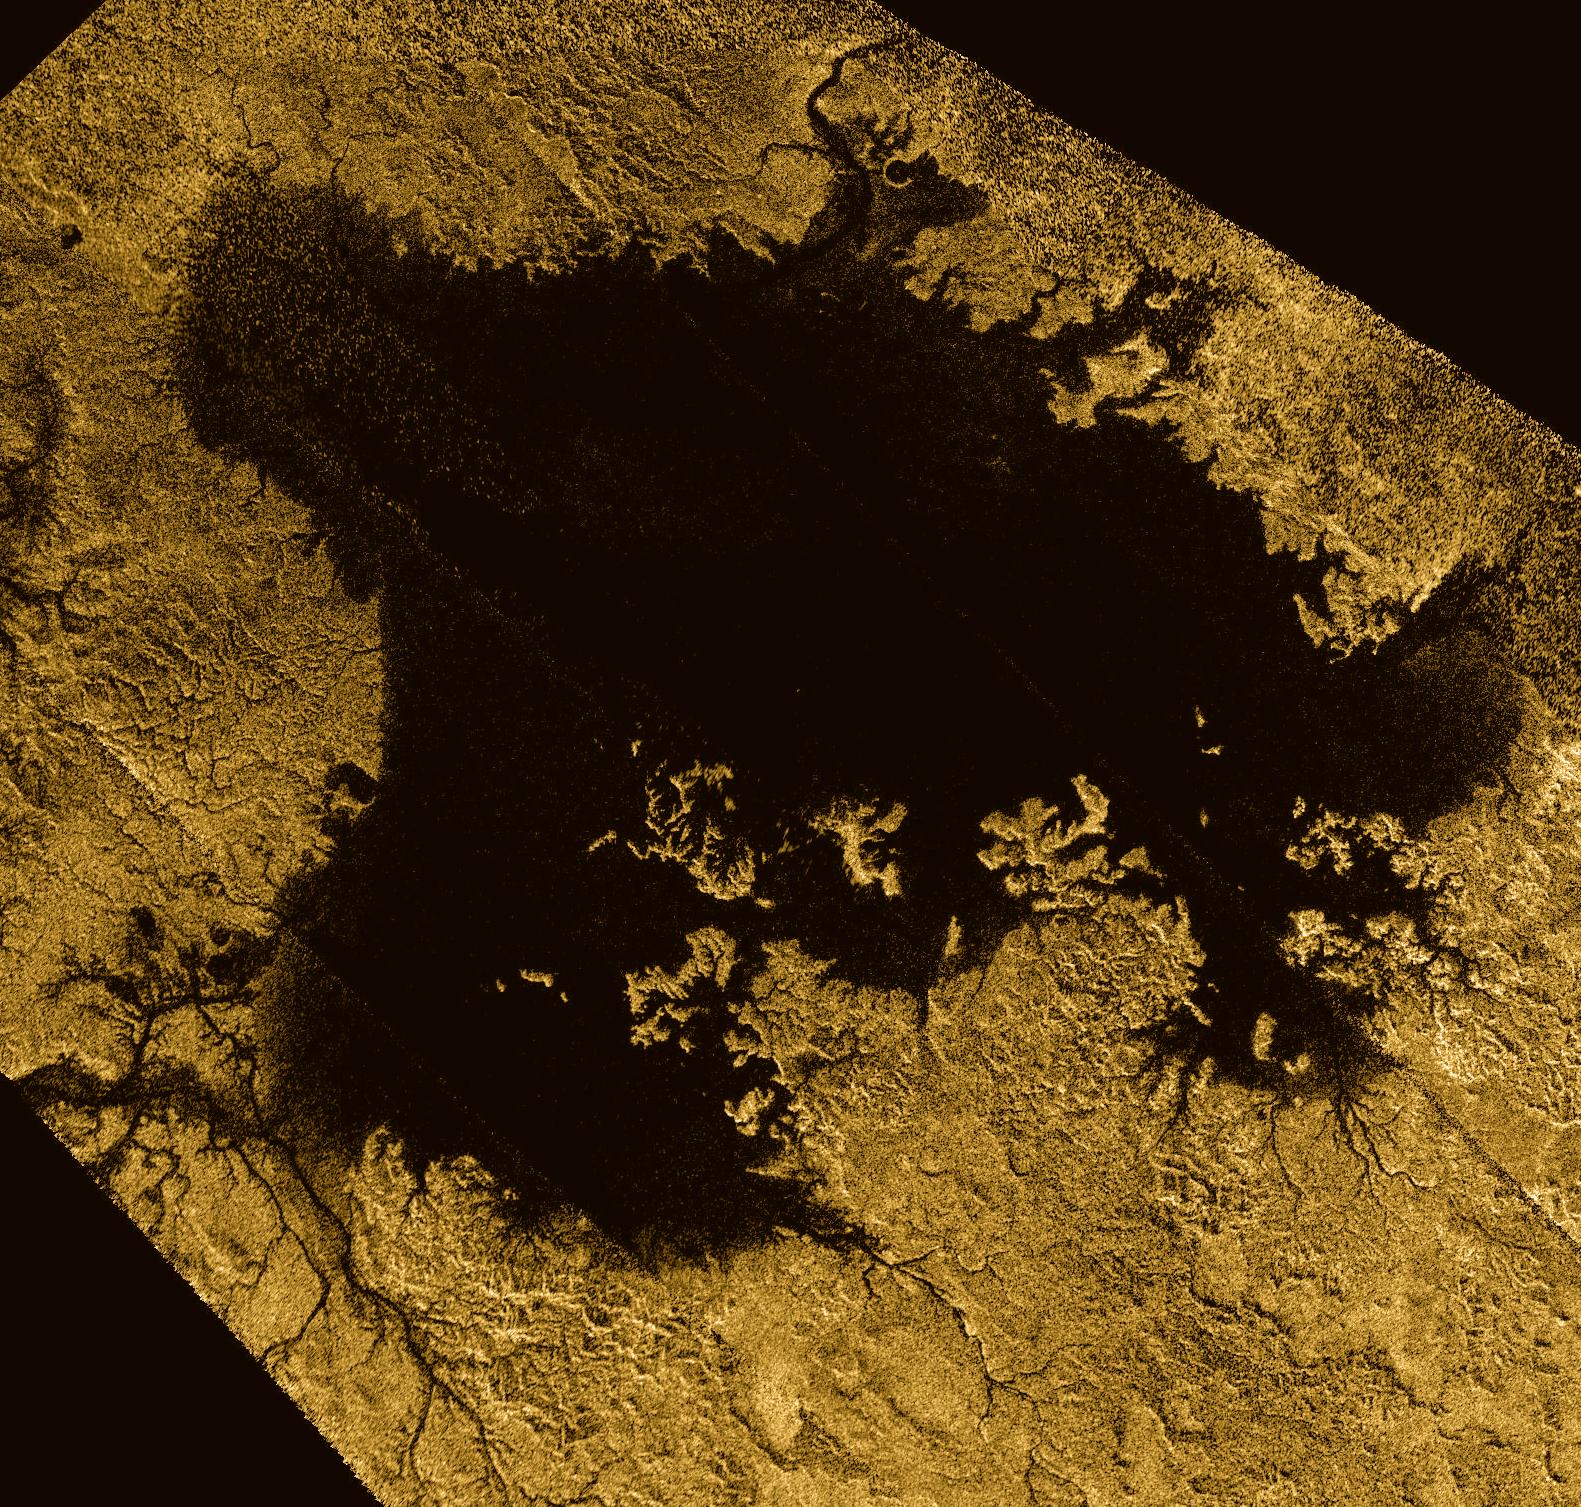 Ligeia Mare, shown here in a false-color image from NASA's Cassini mission, is the second largest known body of liquid on Saturn's moon Titan.